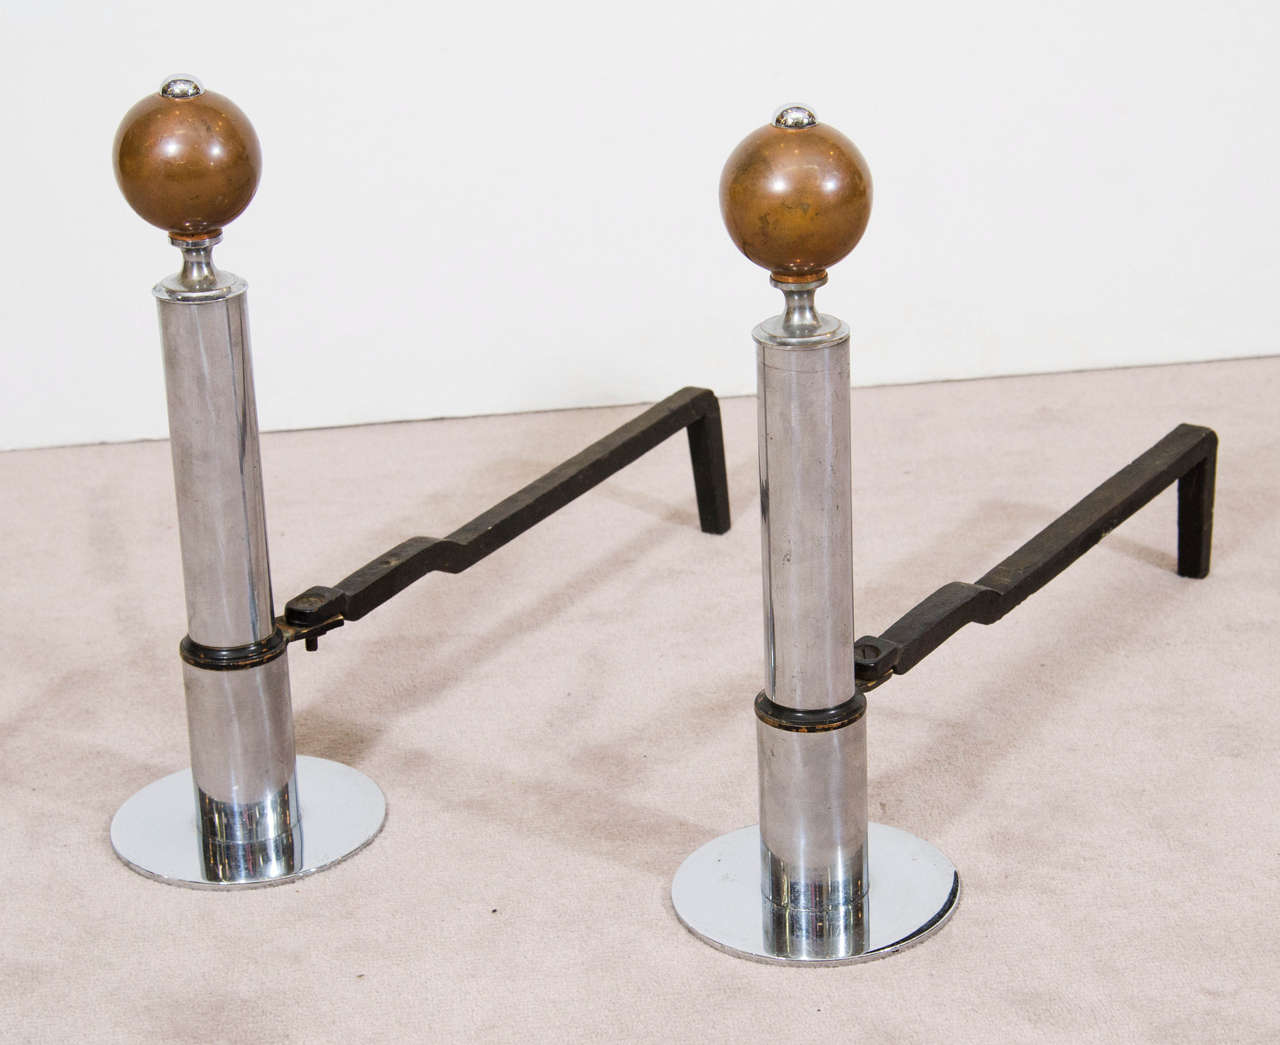 An art deco circa 1930s pair of andirons with chrome cylindrical body and copper ball finials. Good vintage condition with age appropriate wear and patina.

Reduced From: $1,000